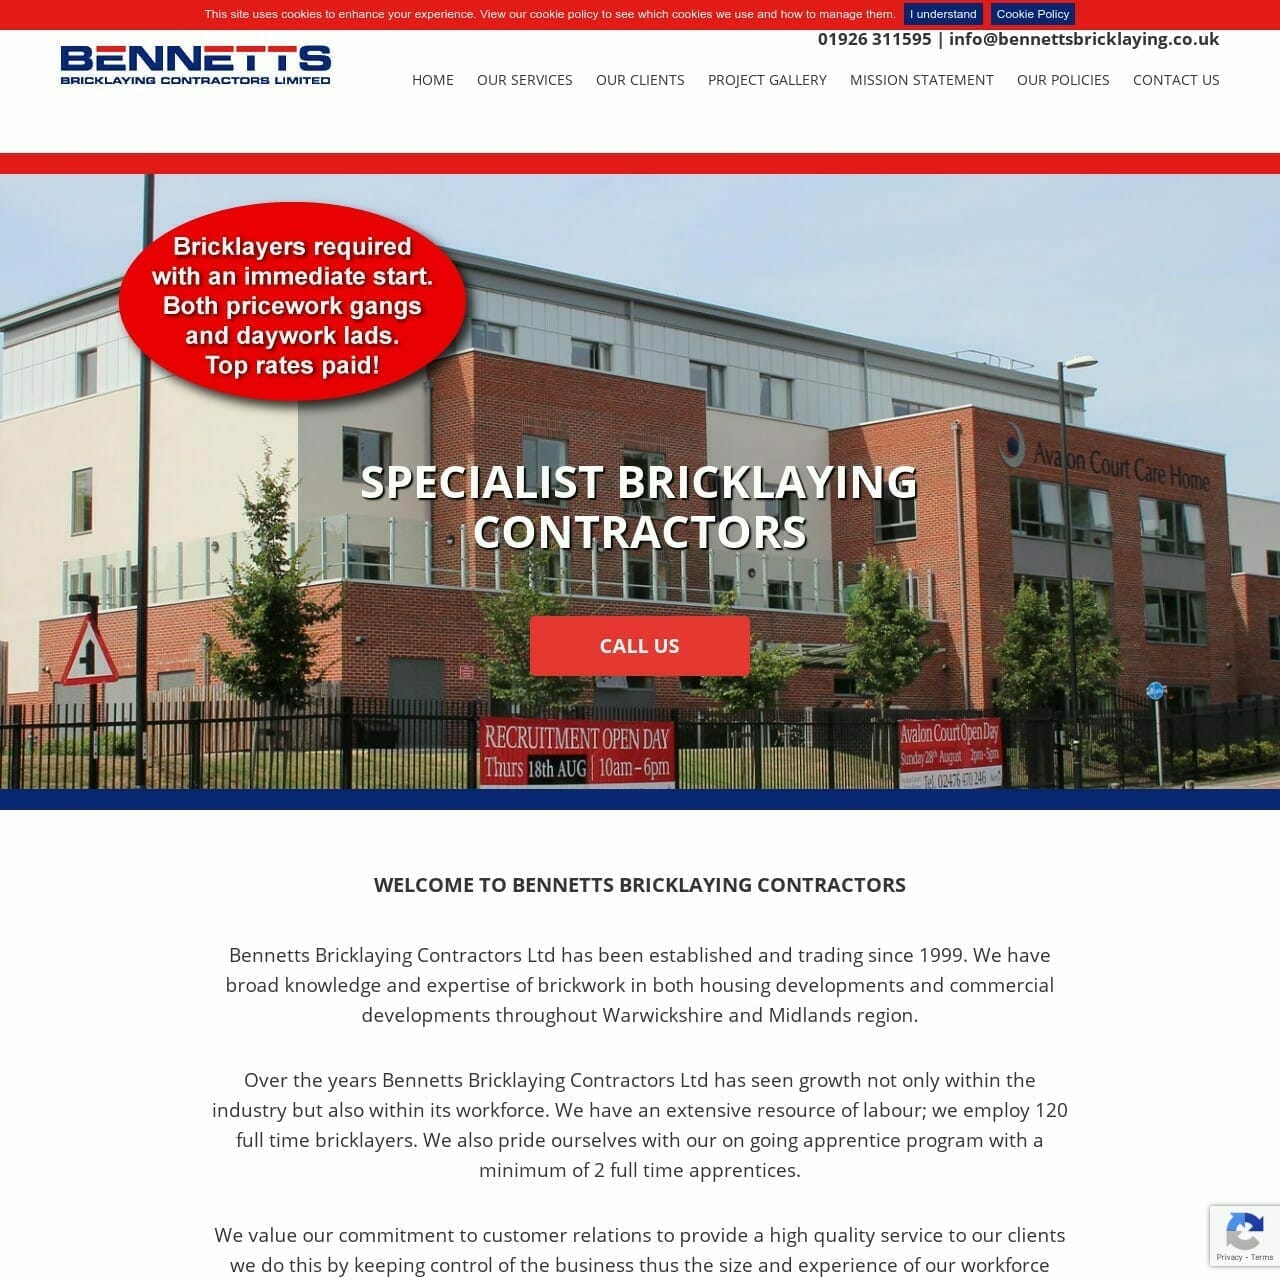 Bennetts Bricklaying